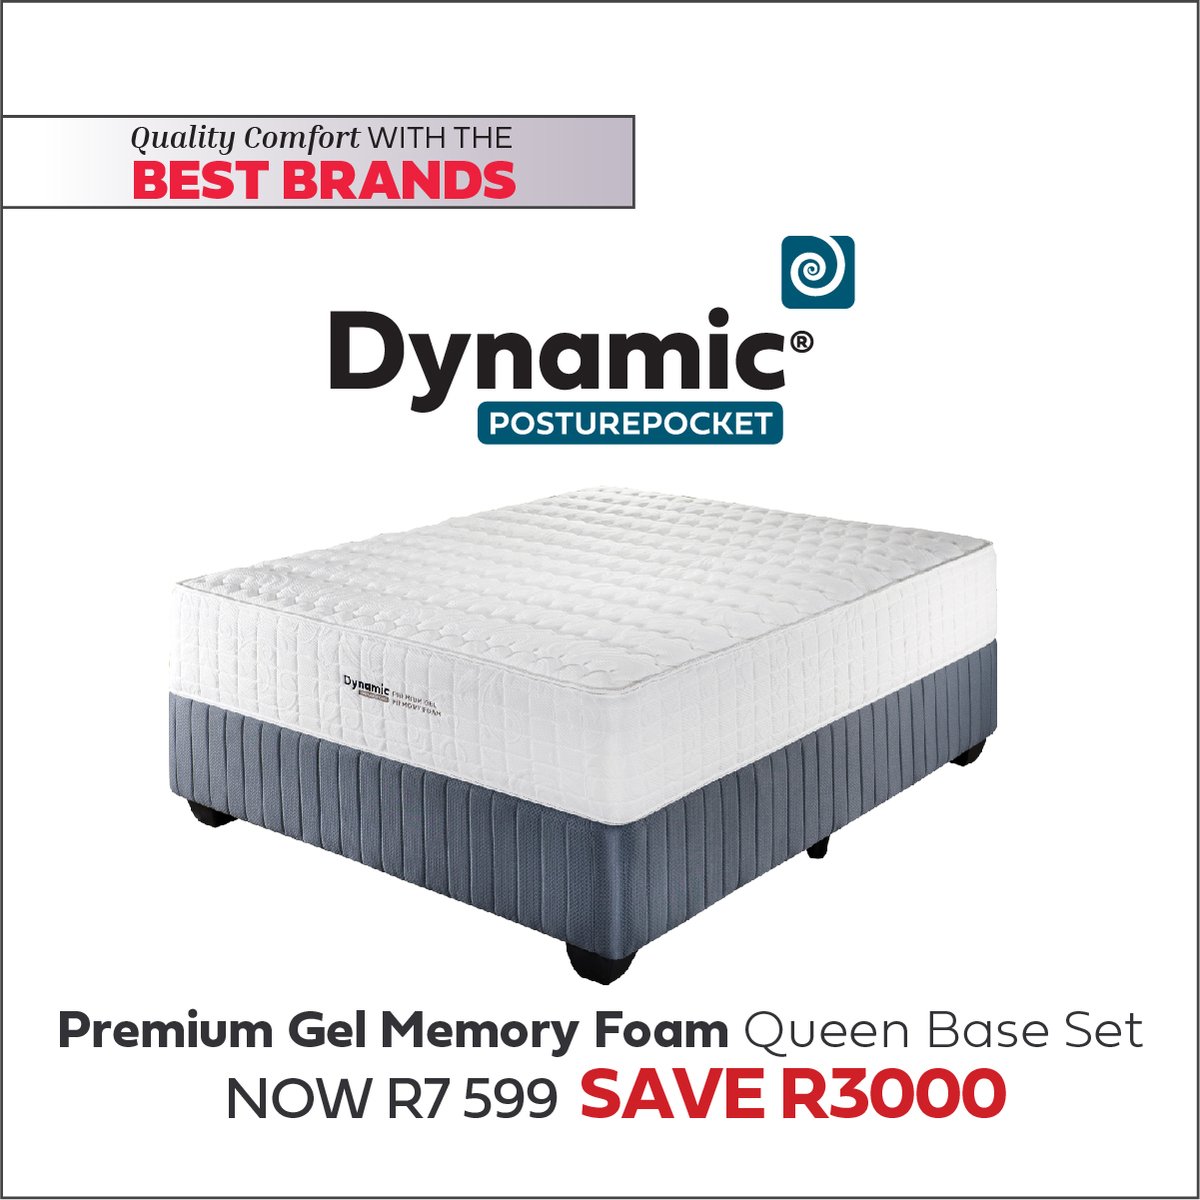 Experience the epitome of comfort and support with our Dynamic Posture Pocket beds. Designed to provide unparalleled rest, these beds ensure you wake up refreshed and ready to conquer the day. Say hello to rejuvenating sleep every night!